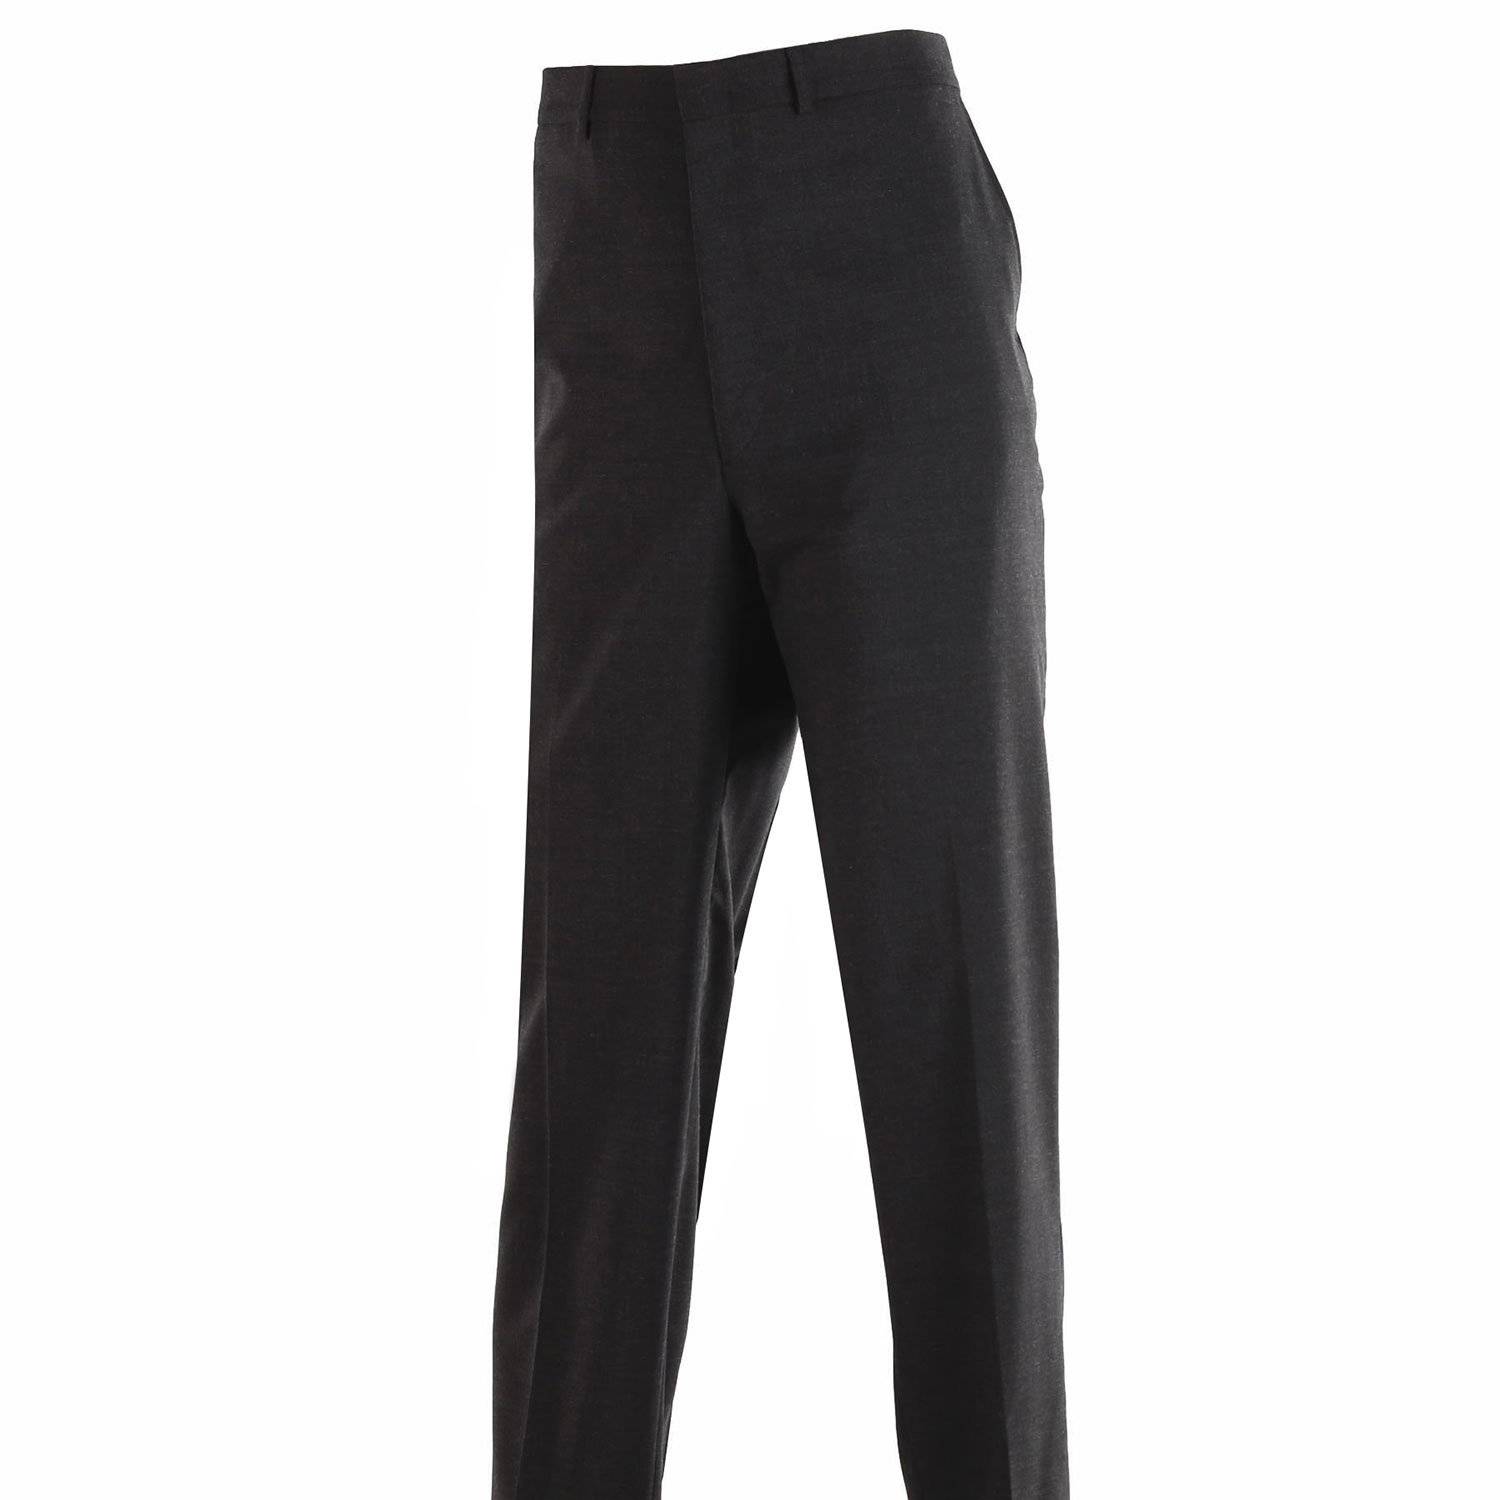 EDWARDS WOMEN'S POLY/WOOL FLAT FRONT PANEL PANT